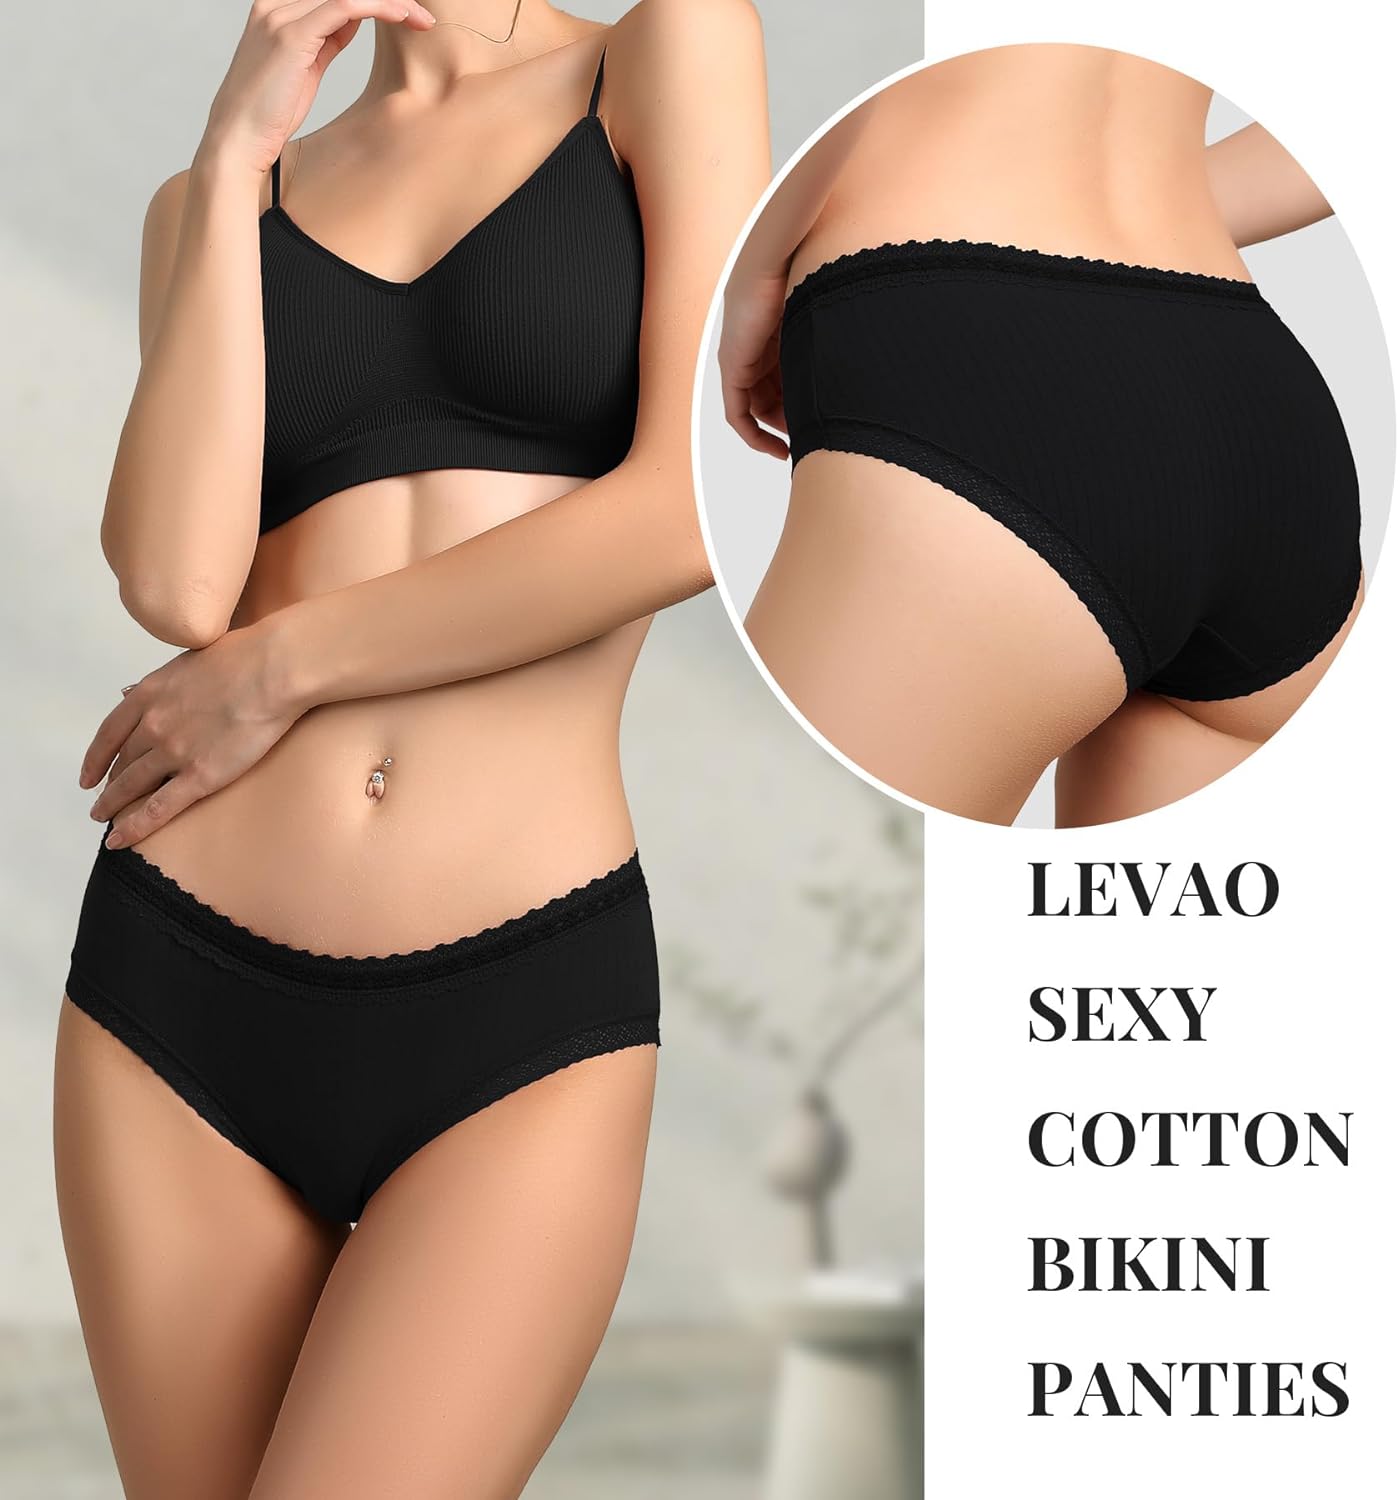 LEVAO 7 Pack Cotton Underwear for Women Sexy Lace Bikini Panties Low Rise Hipster Briefs Multi-Pack S-XL